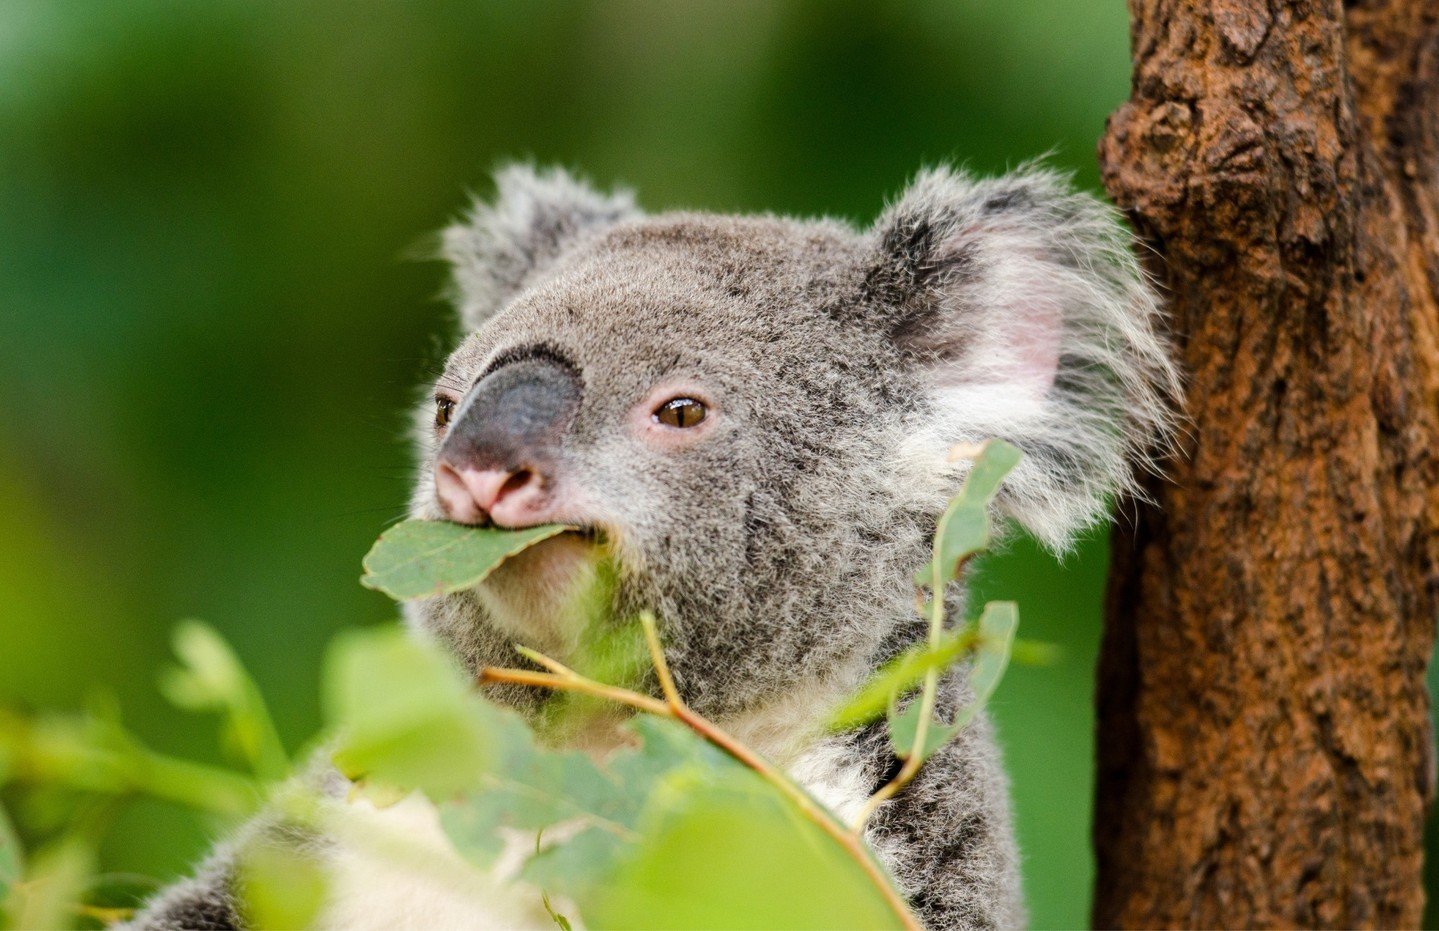 Happy Wild Koala Day! 🐨⁠
⁠
On May 3, wildlife enthusiasts, conservationists, and koala lovers worldwide unite to celebrate International Wild Koala Day. ⁠
⁠
This day is dedicated to raising awareness about these iconic marsupials and their challenge